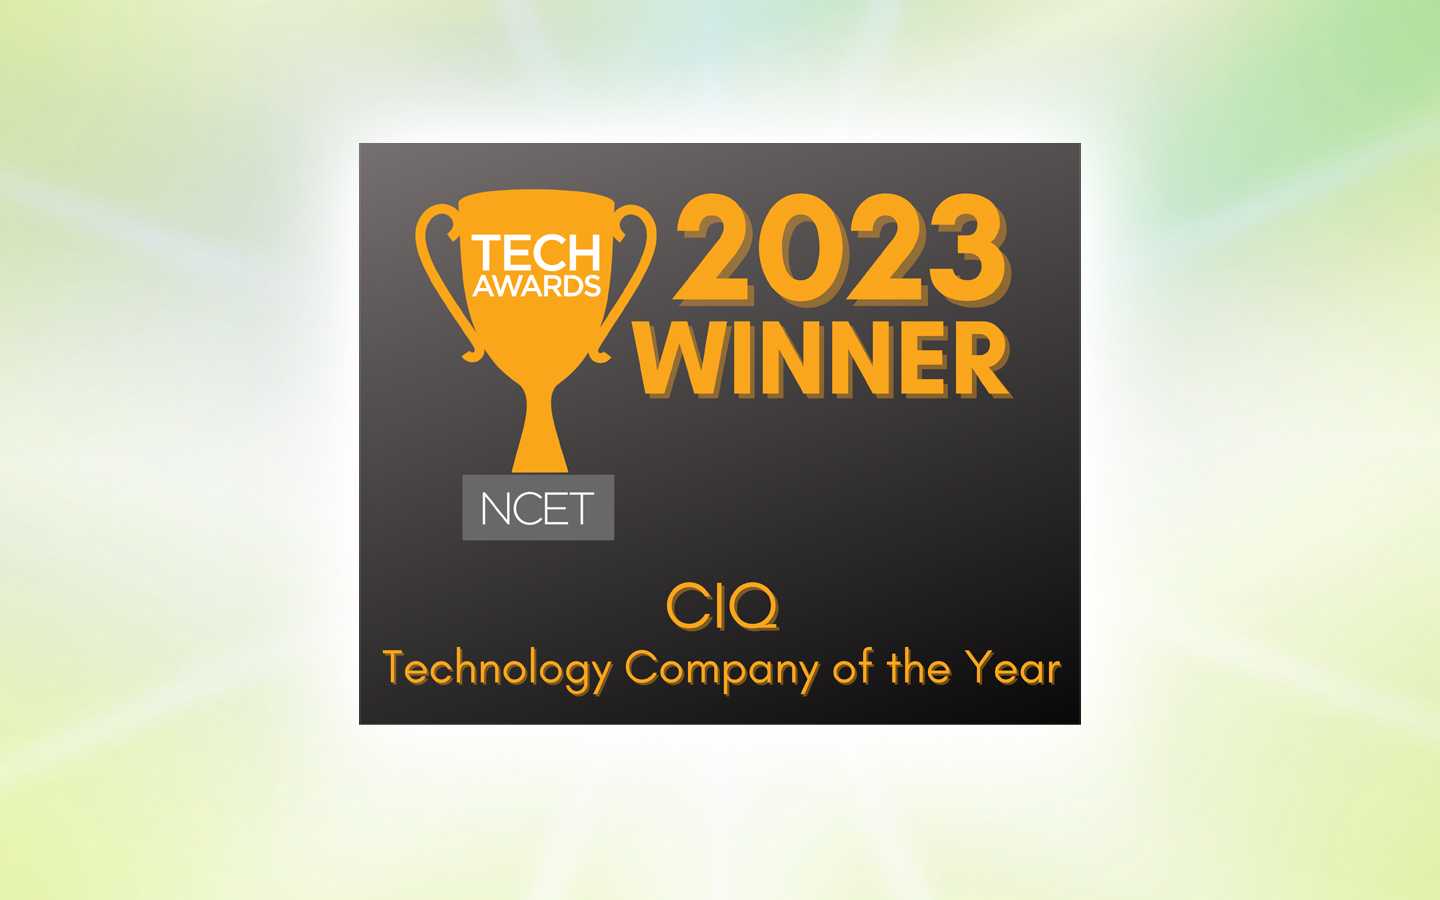 CIQ Named NCET’s Technology Company of the Year